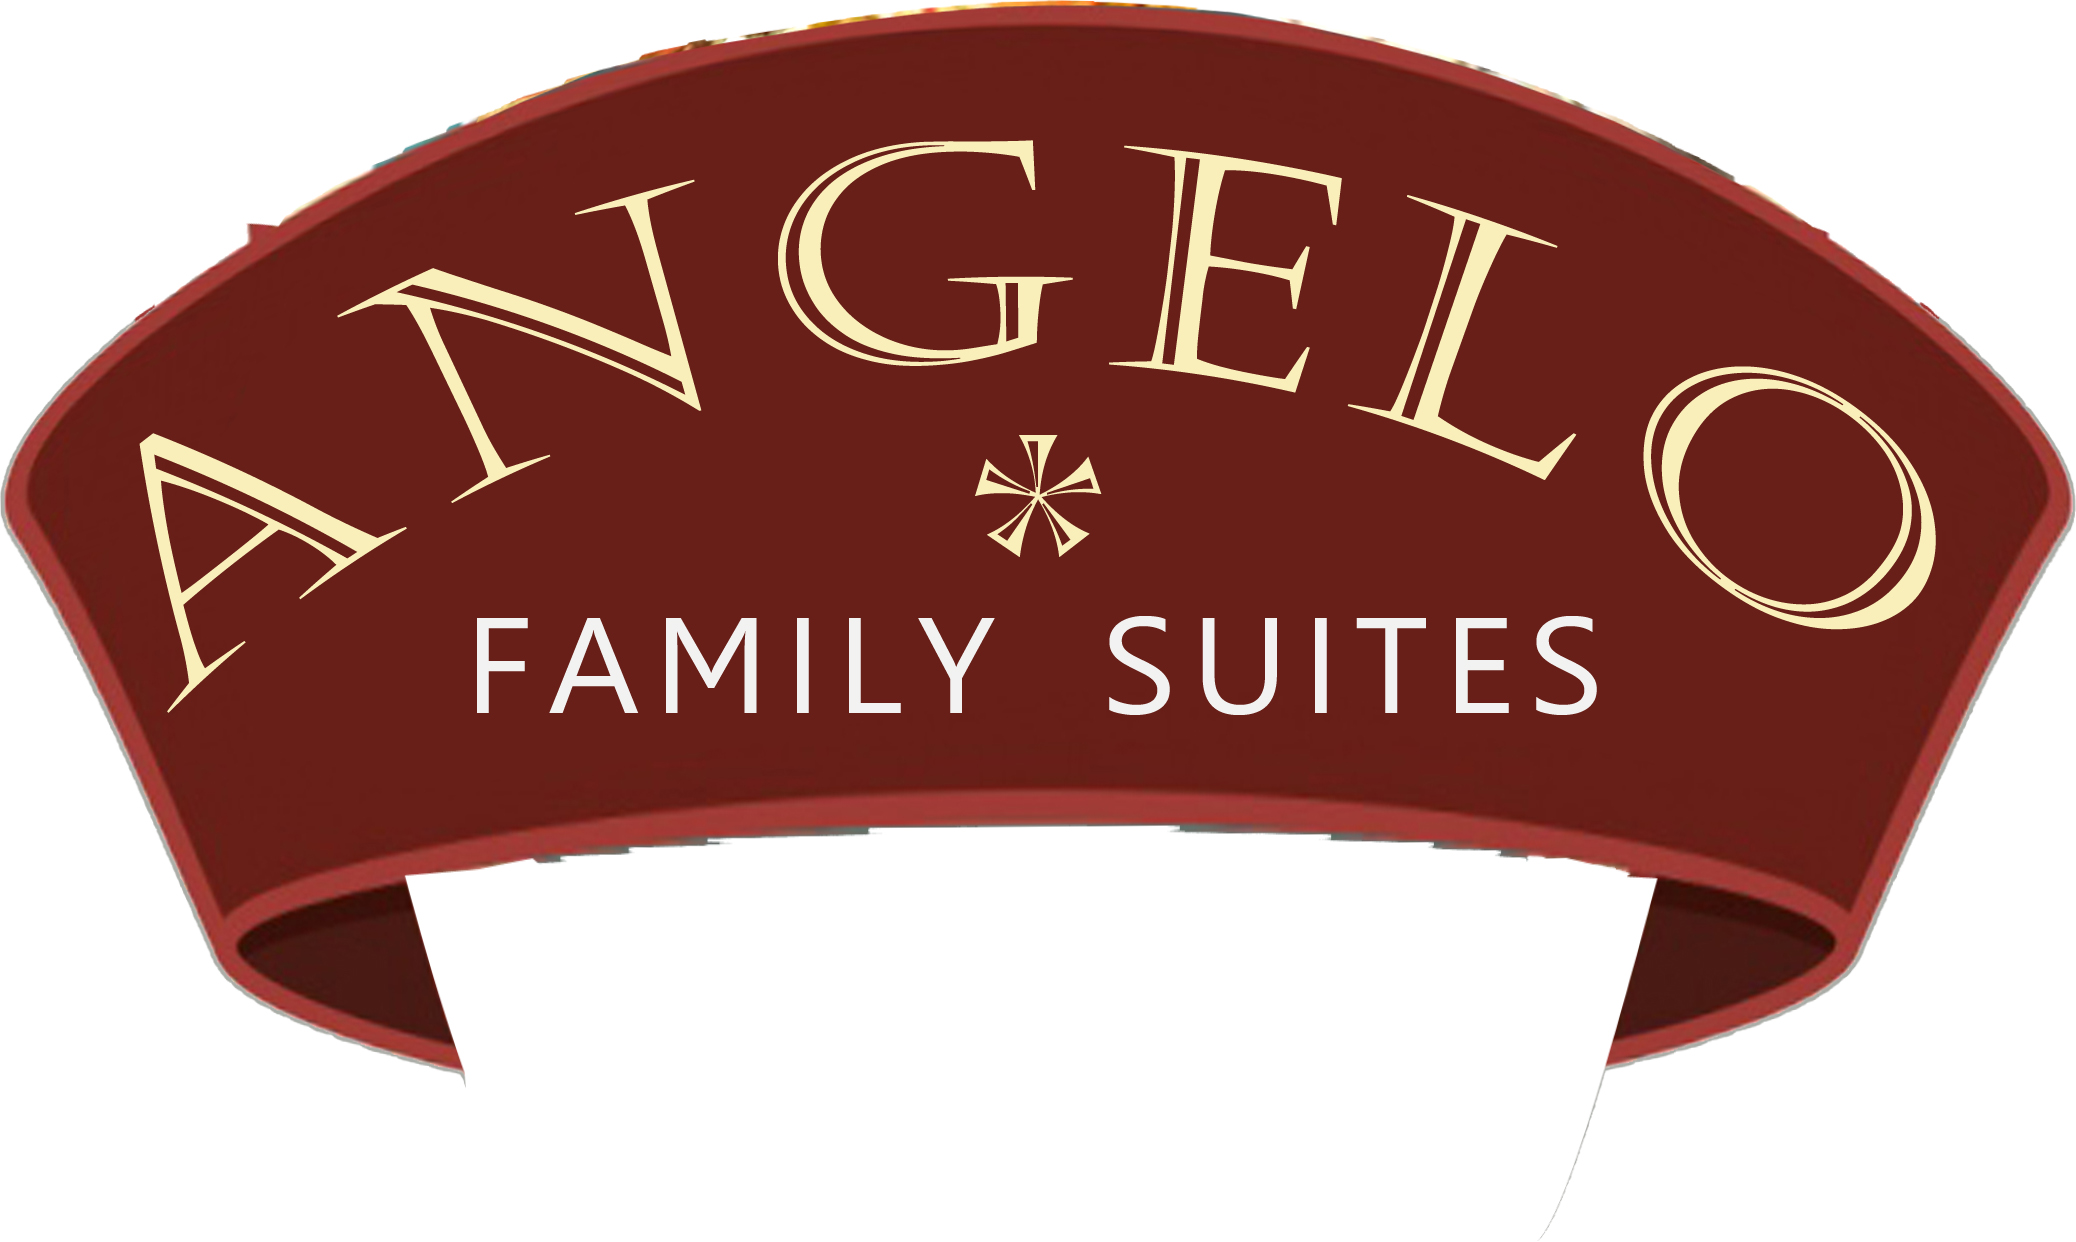 ANGELO FAMILY SUITES